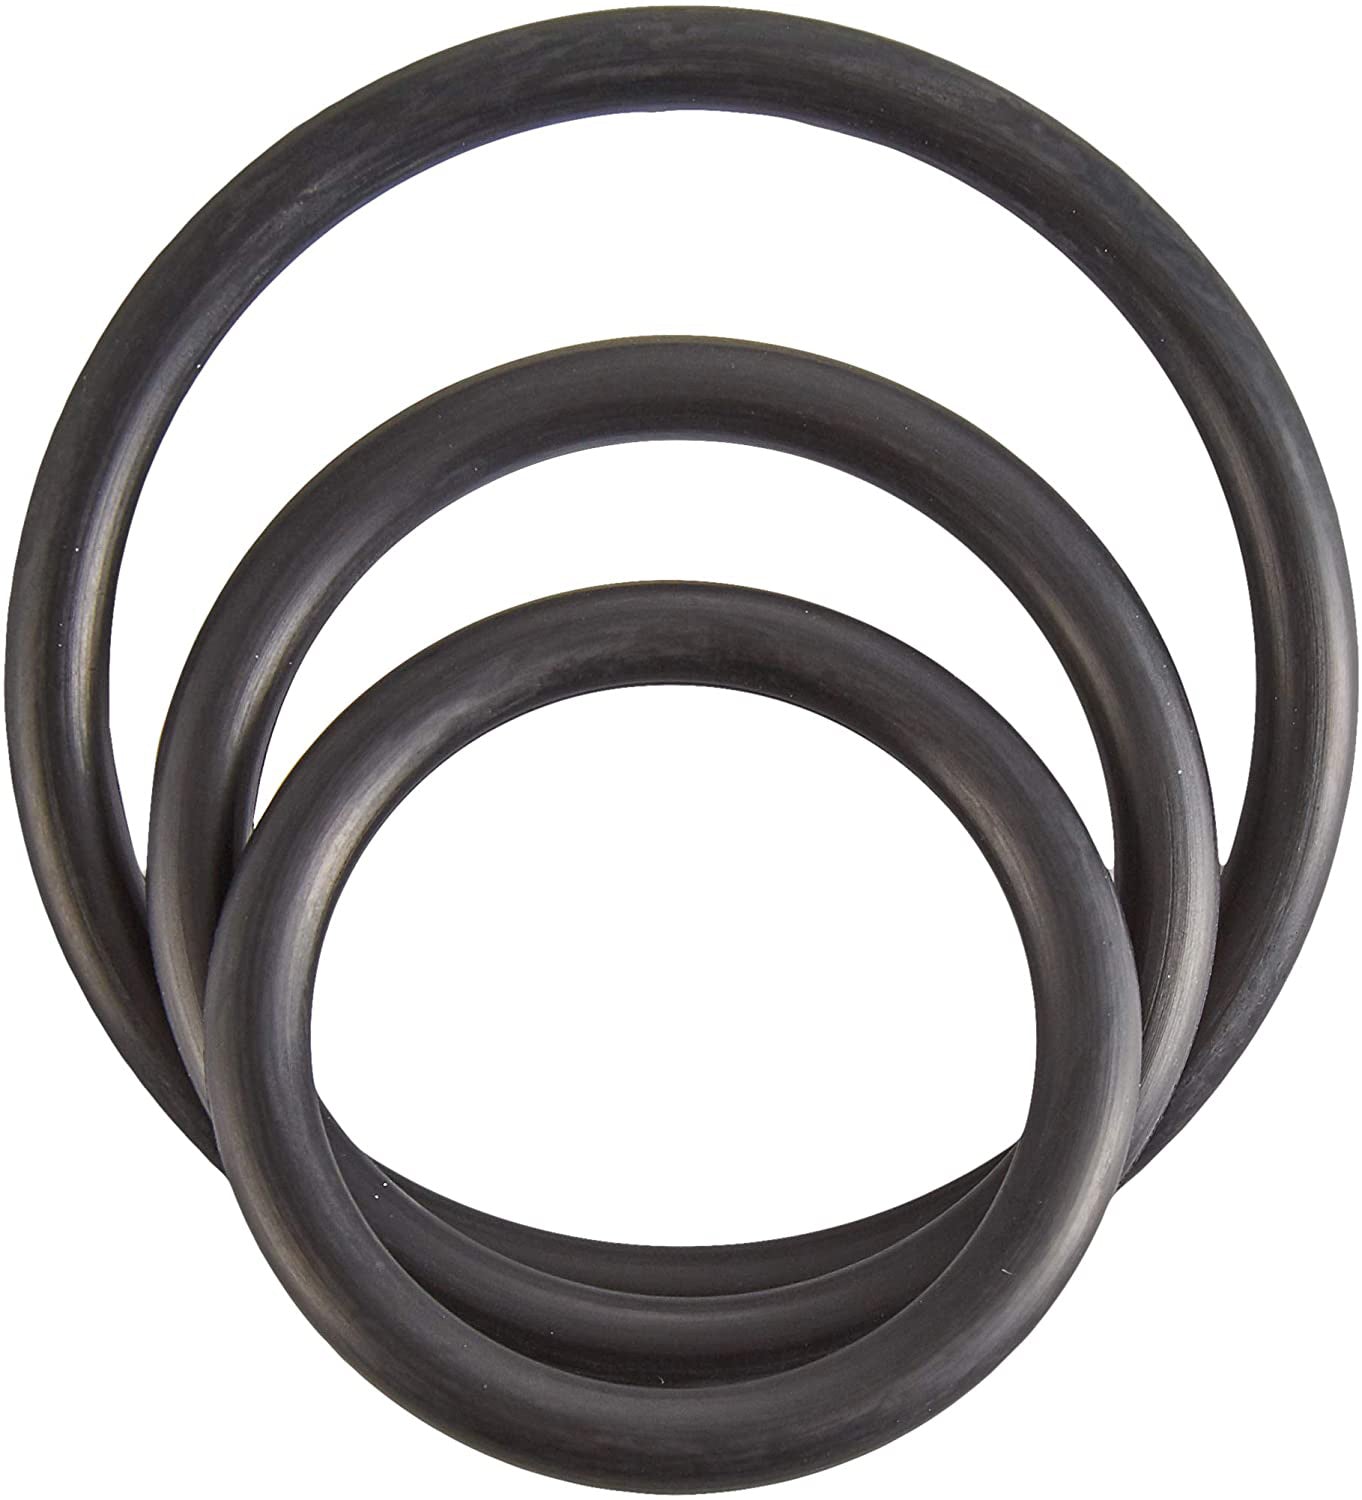 Rubber Cock Ring Set - Black BSPR-14